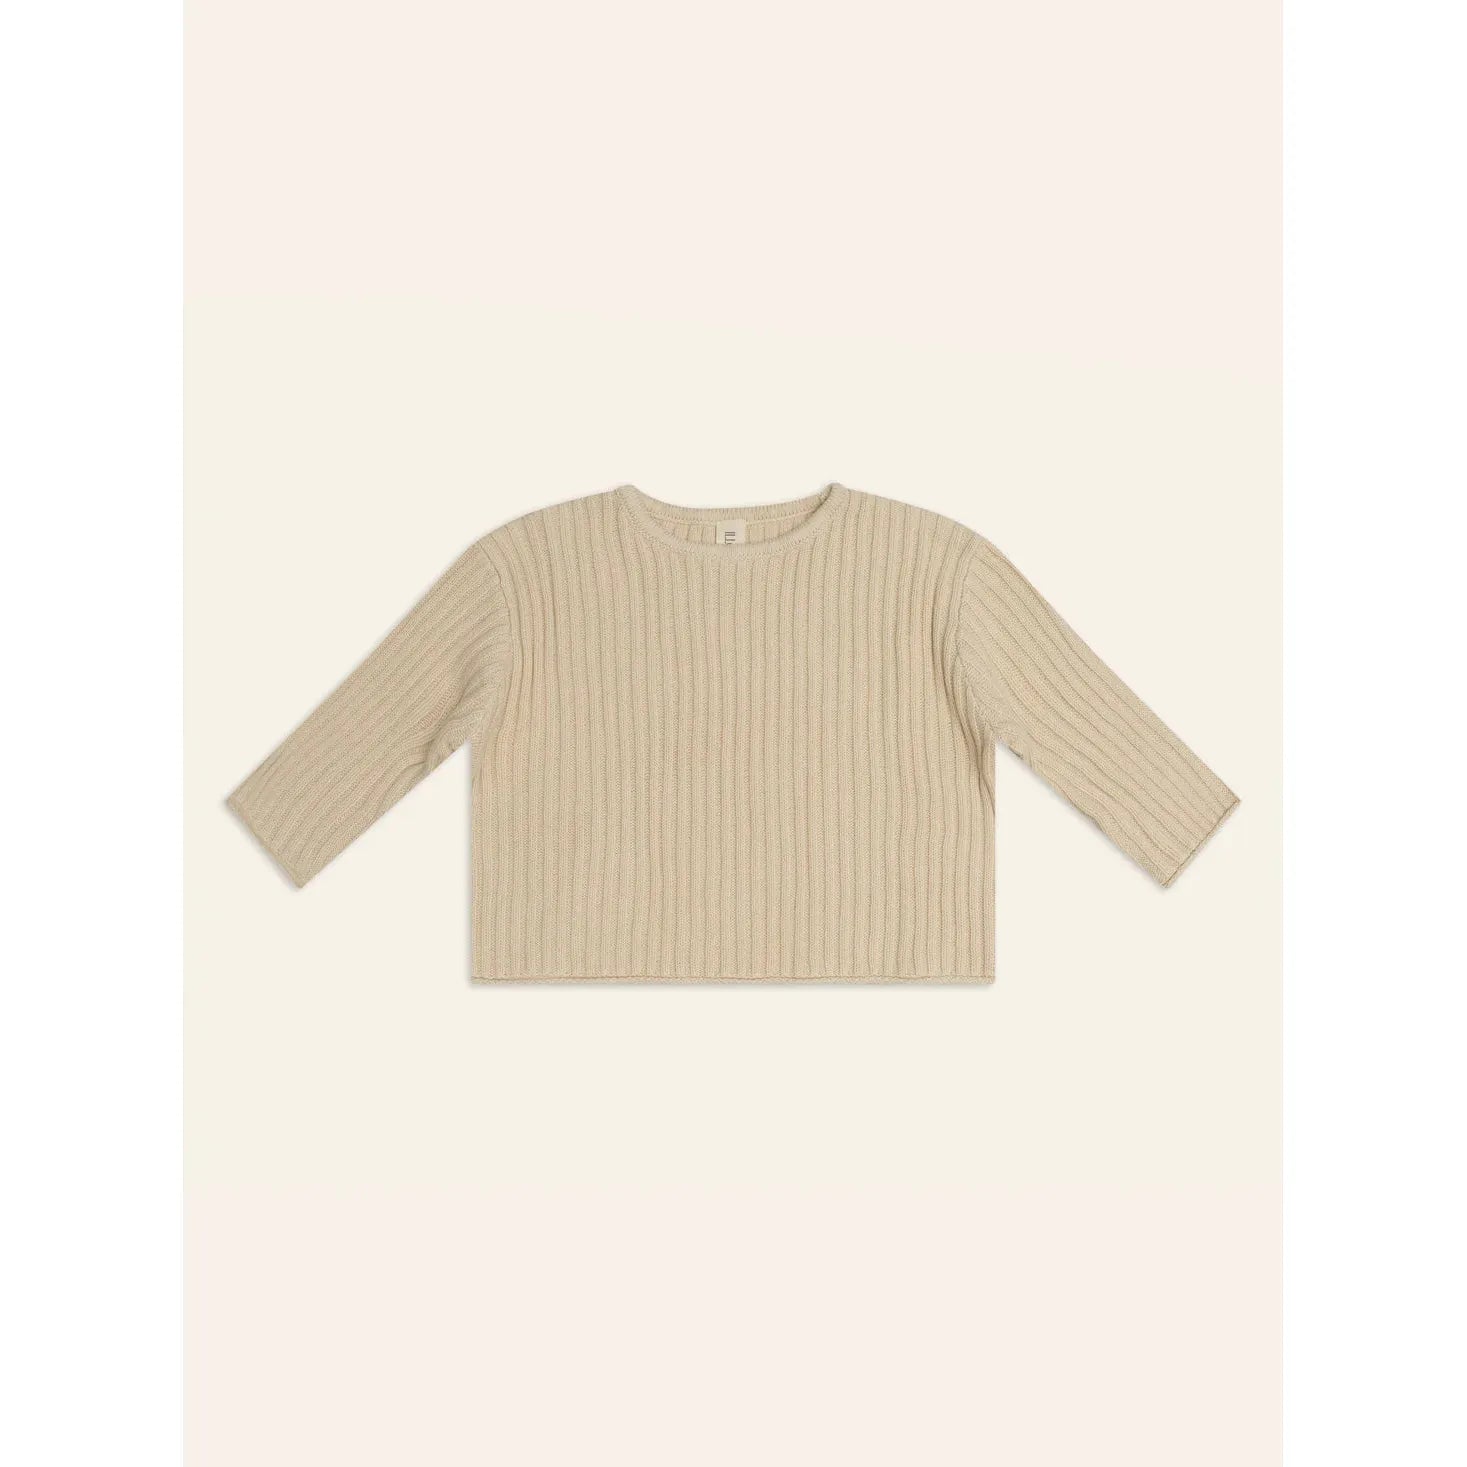 Illoura The Label Essential Knit Jumper - Biscuit